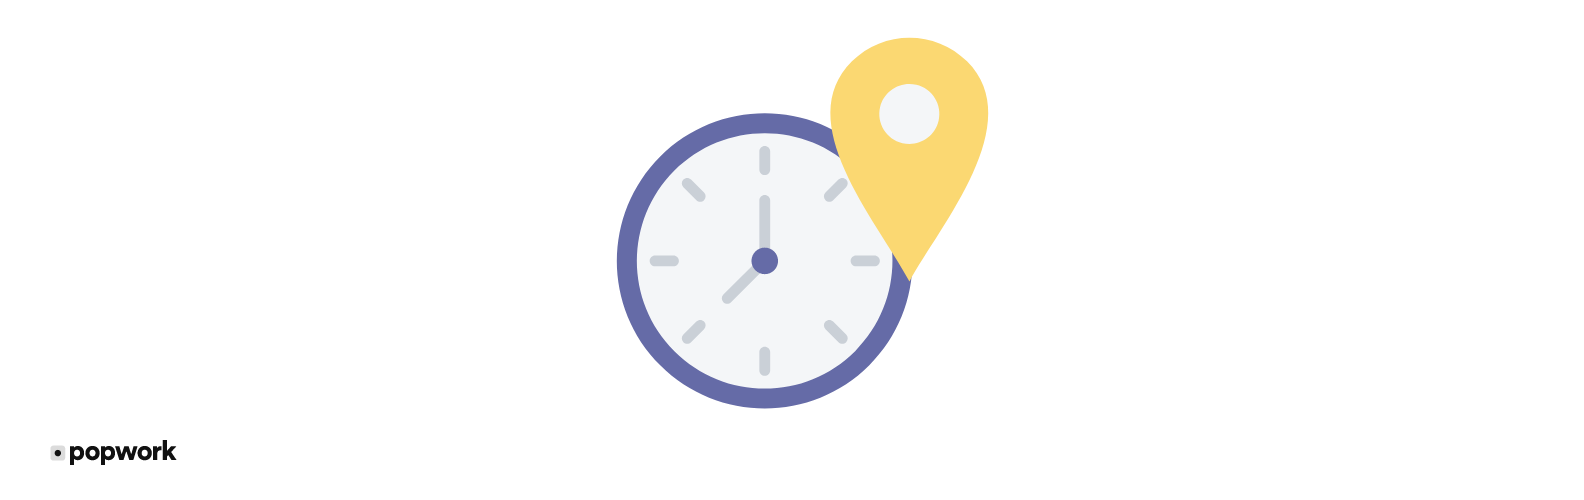 A clock and a location pin - Popwork